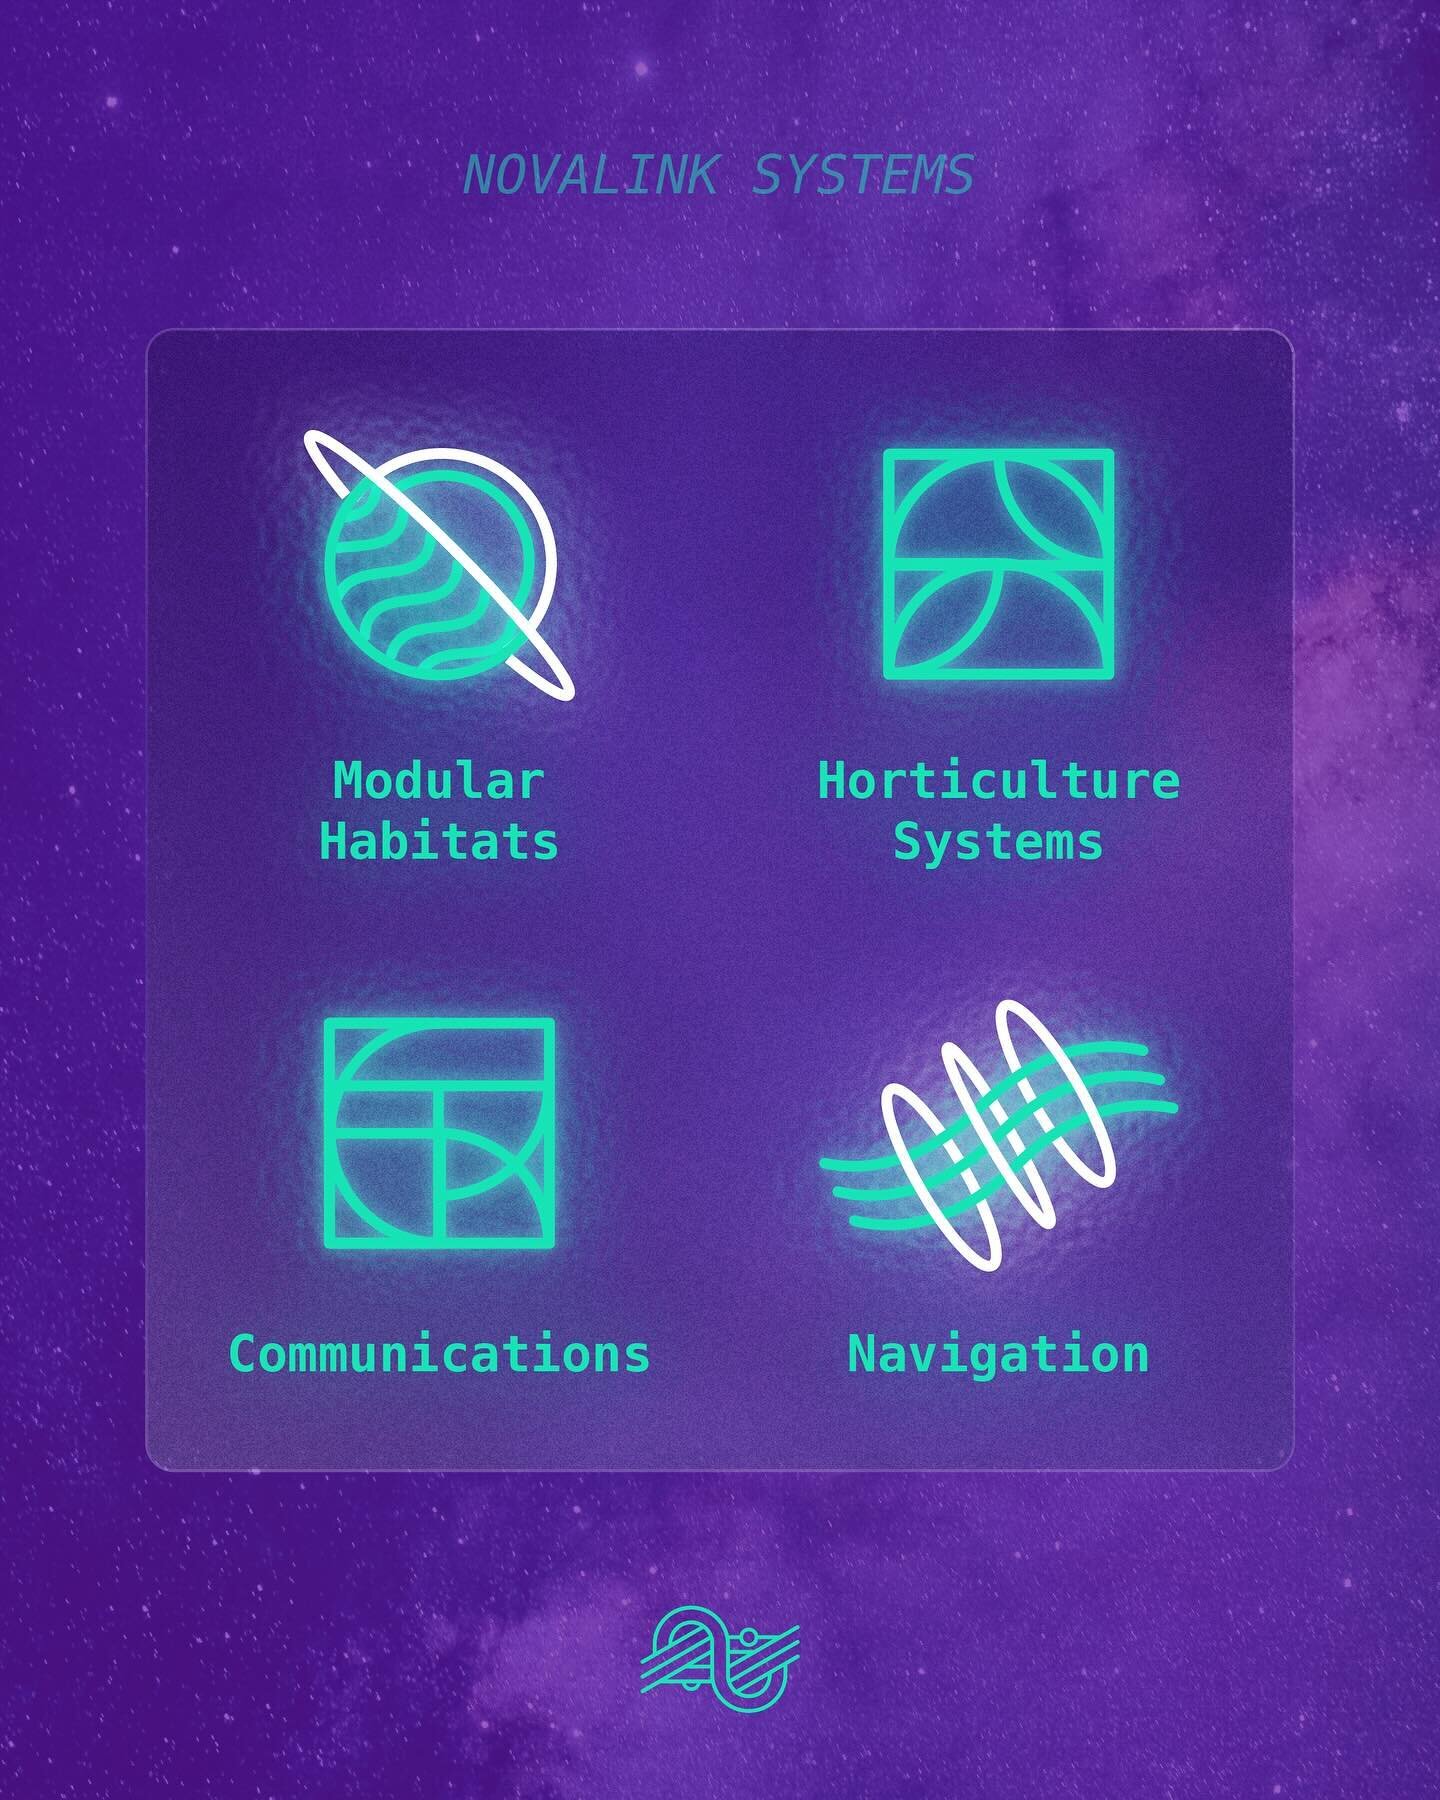 Tasked with creating an icon style for Novalink, I have settled on 2 classes of icons. One is more abstract, and the other is more objective, but nonspecific. I think the abstract set will be for internal/functional use, and the objective style will 